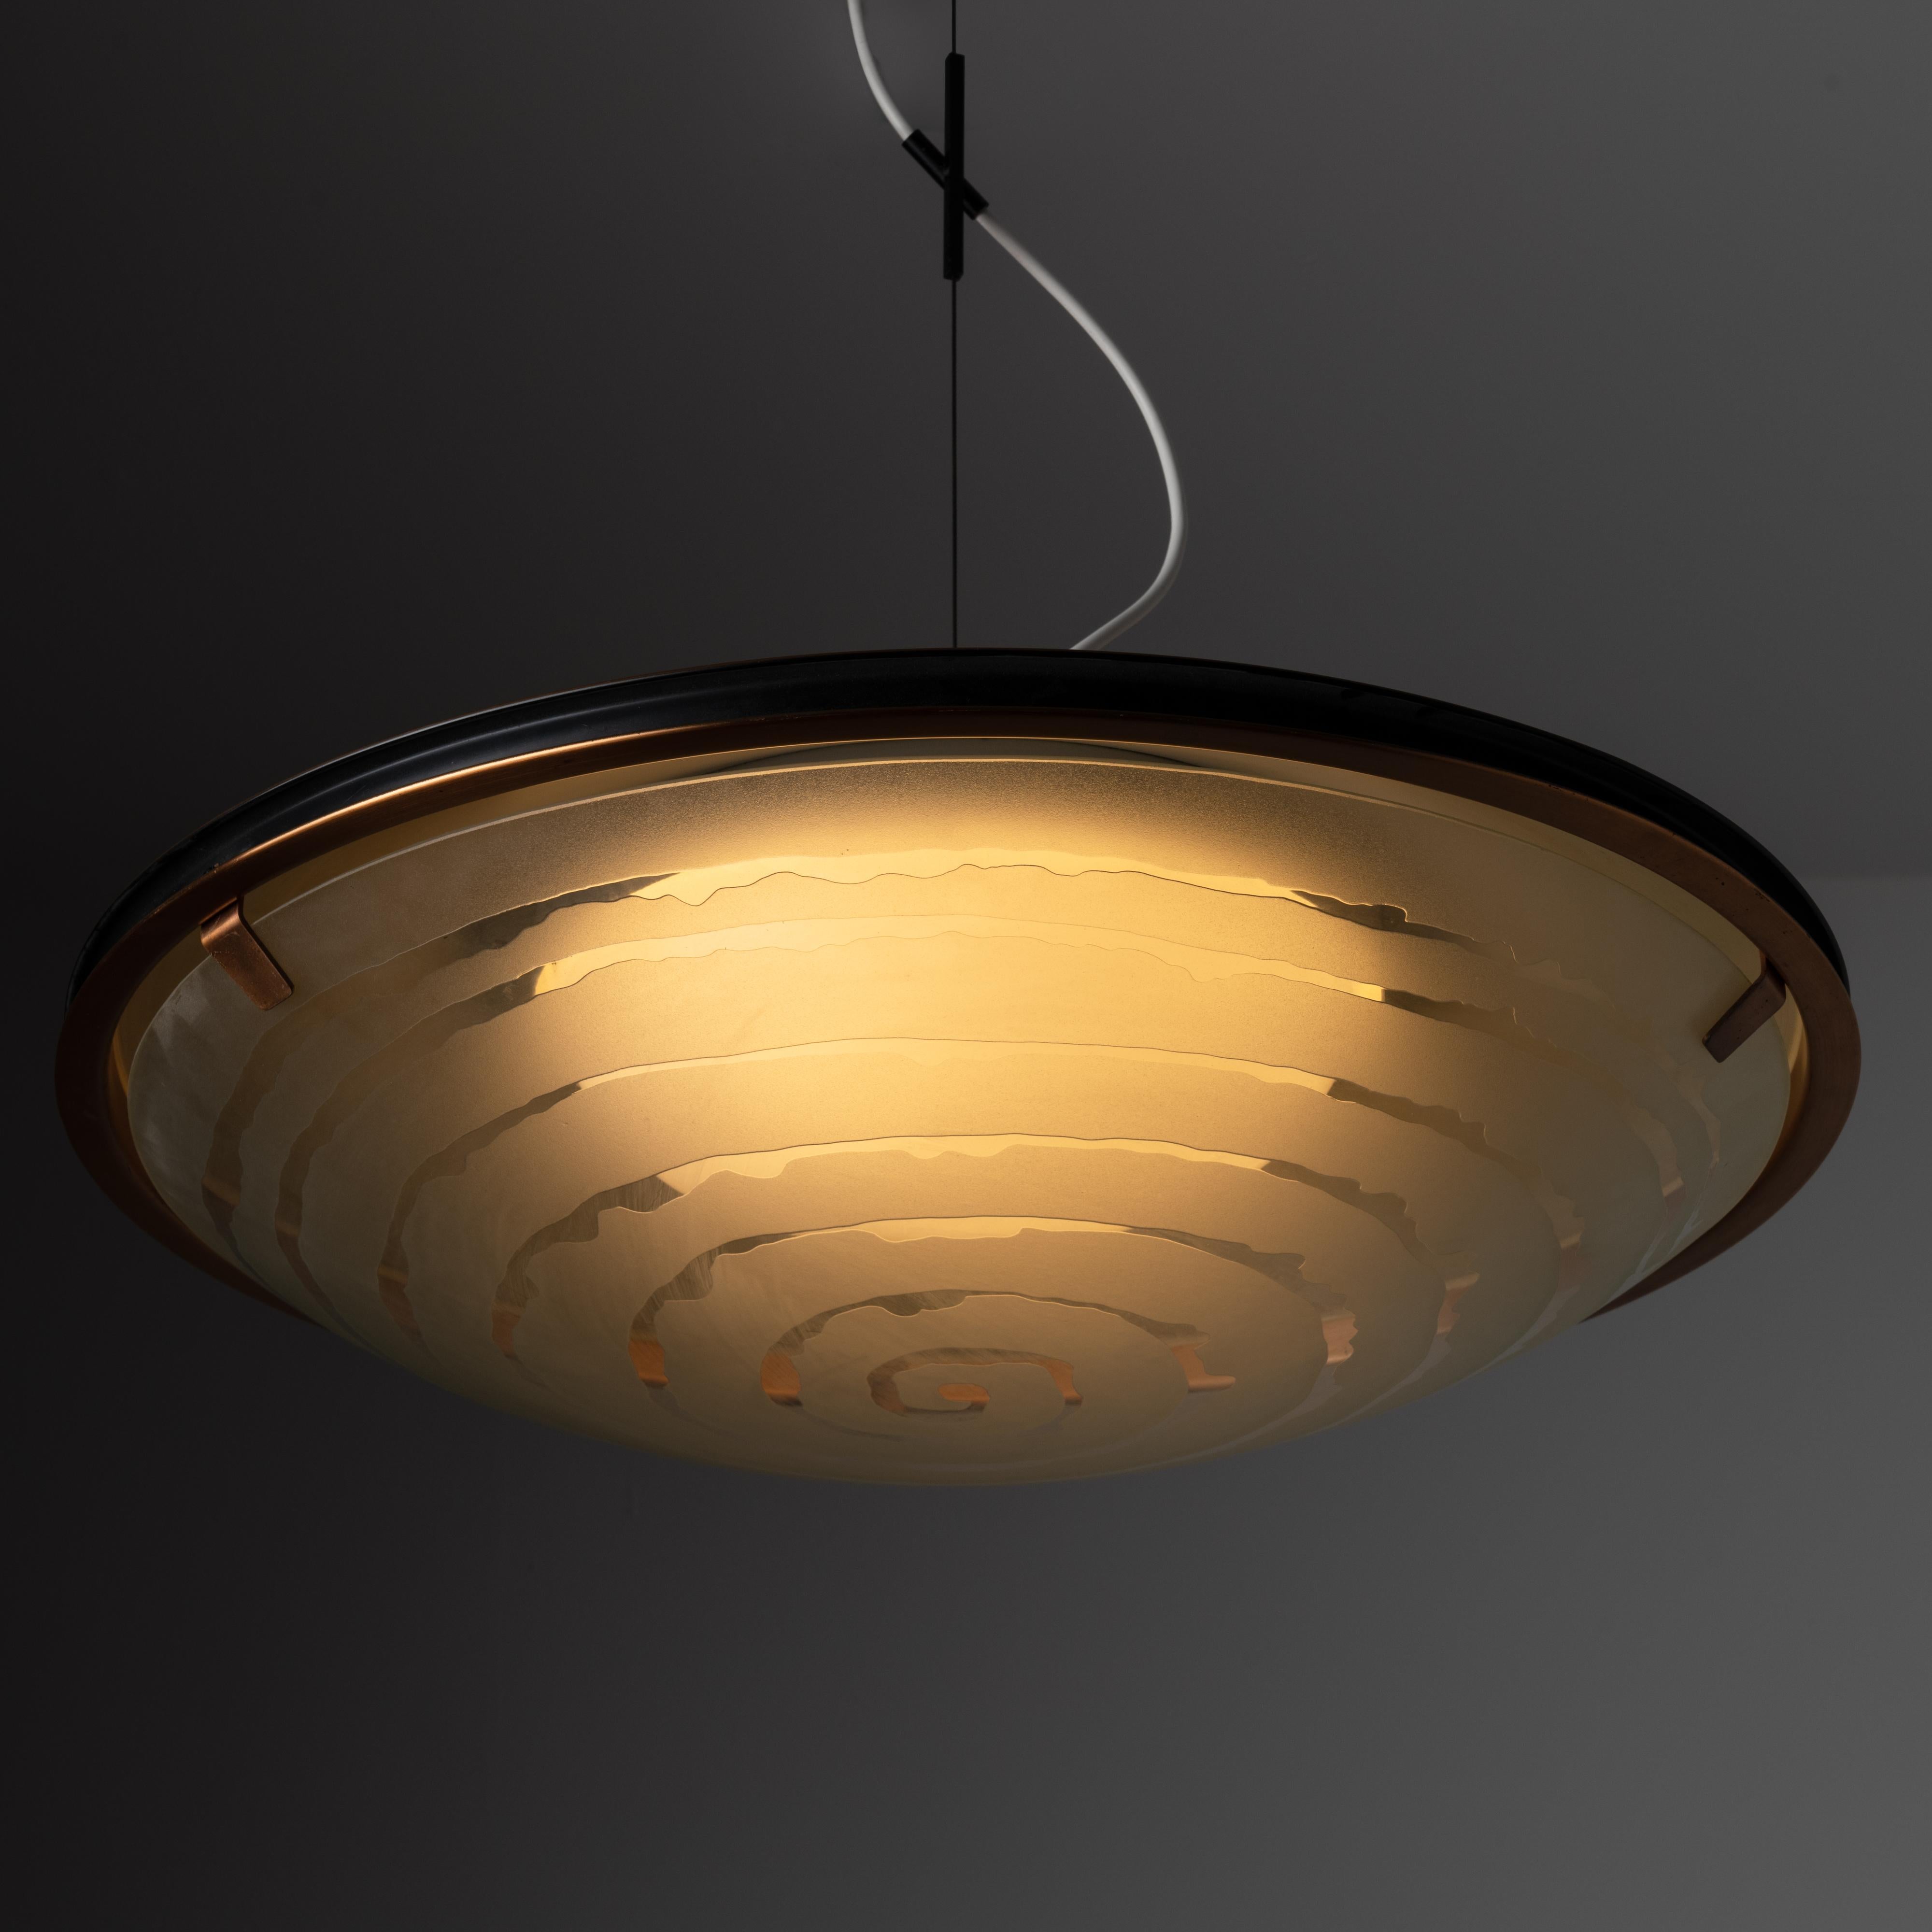 Ceiling light by Gaetano Sciolari for Stilnovo. Designed and manufactured in Italy, circa 1950. Aluminum frame with anodized copper finish, featuring a unique etched spiral within the frosted glass shade that encloses an opaline white diffuser